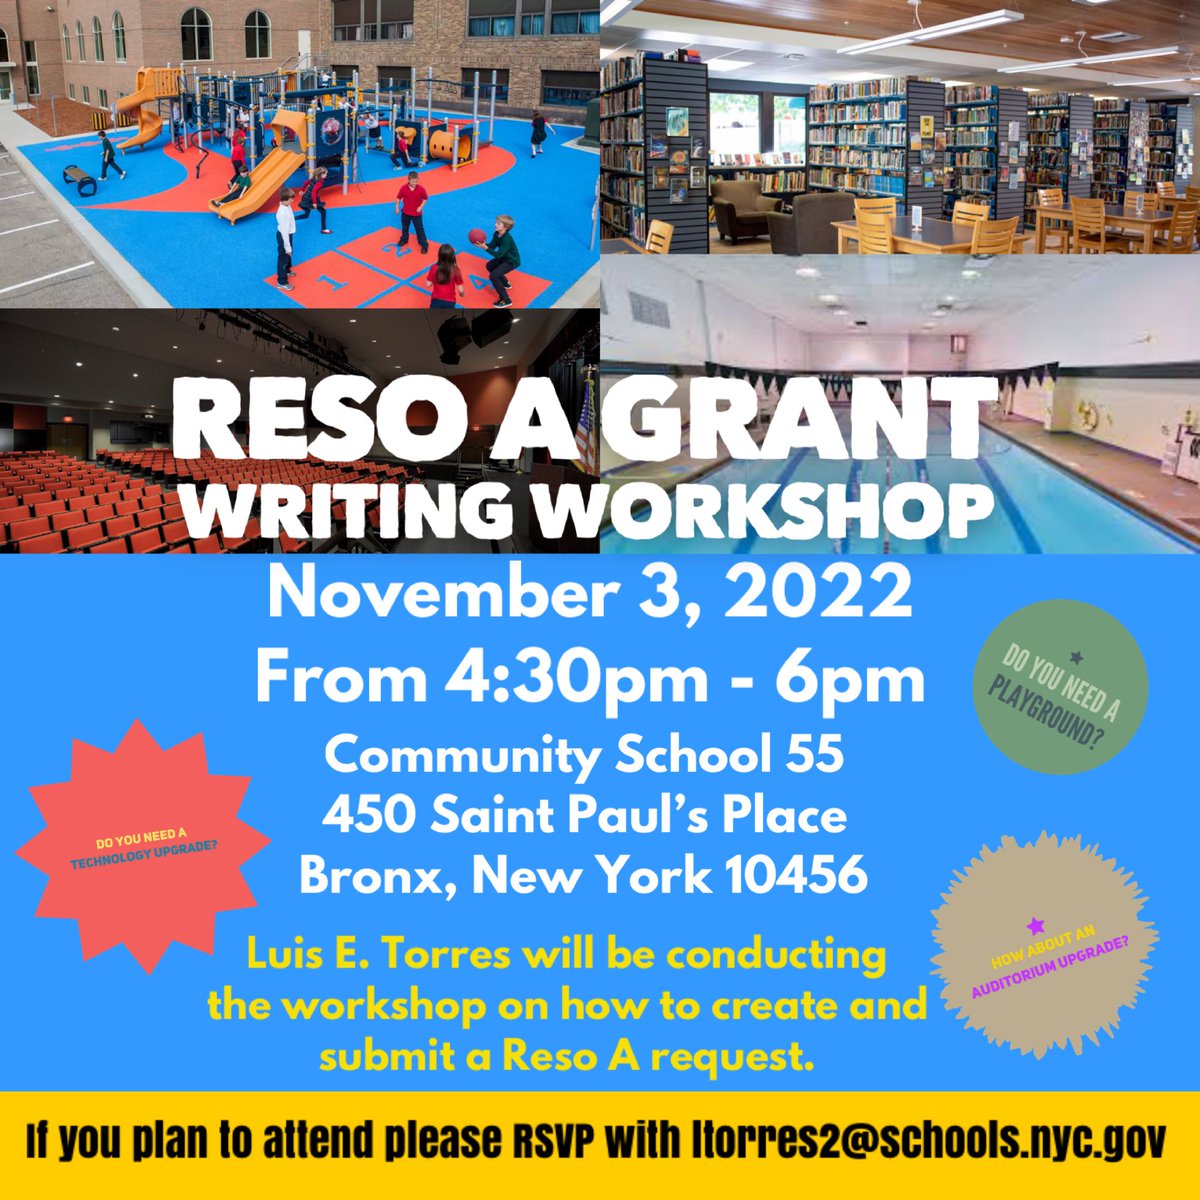 Please share with any #bronx schools that can use this. All school leaders can benefit from this information. Learn how to apply and submit your application for RESO A funding. Do you need a technology upgrade, library, cafeteria or funding for other projects in your school?